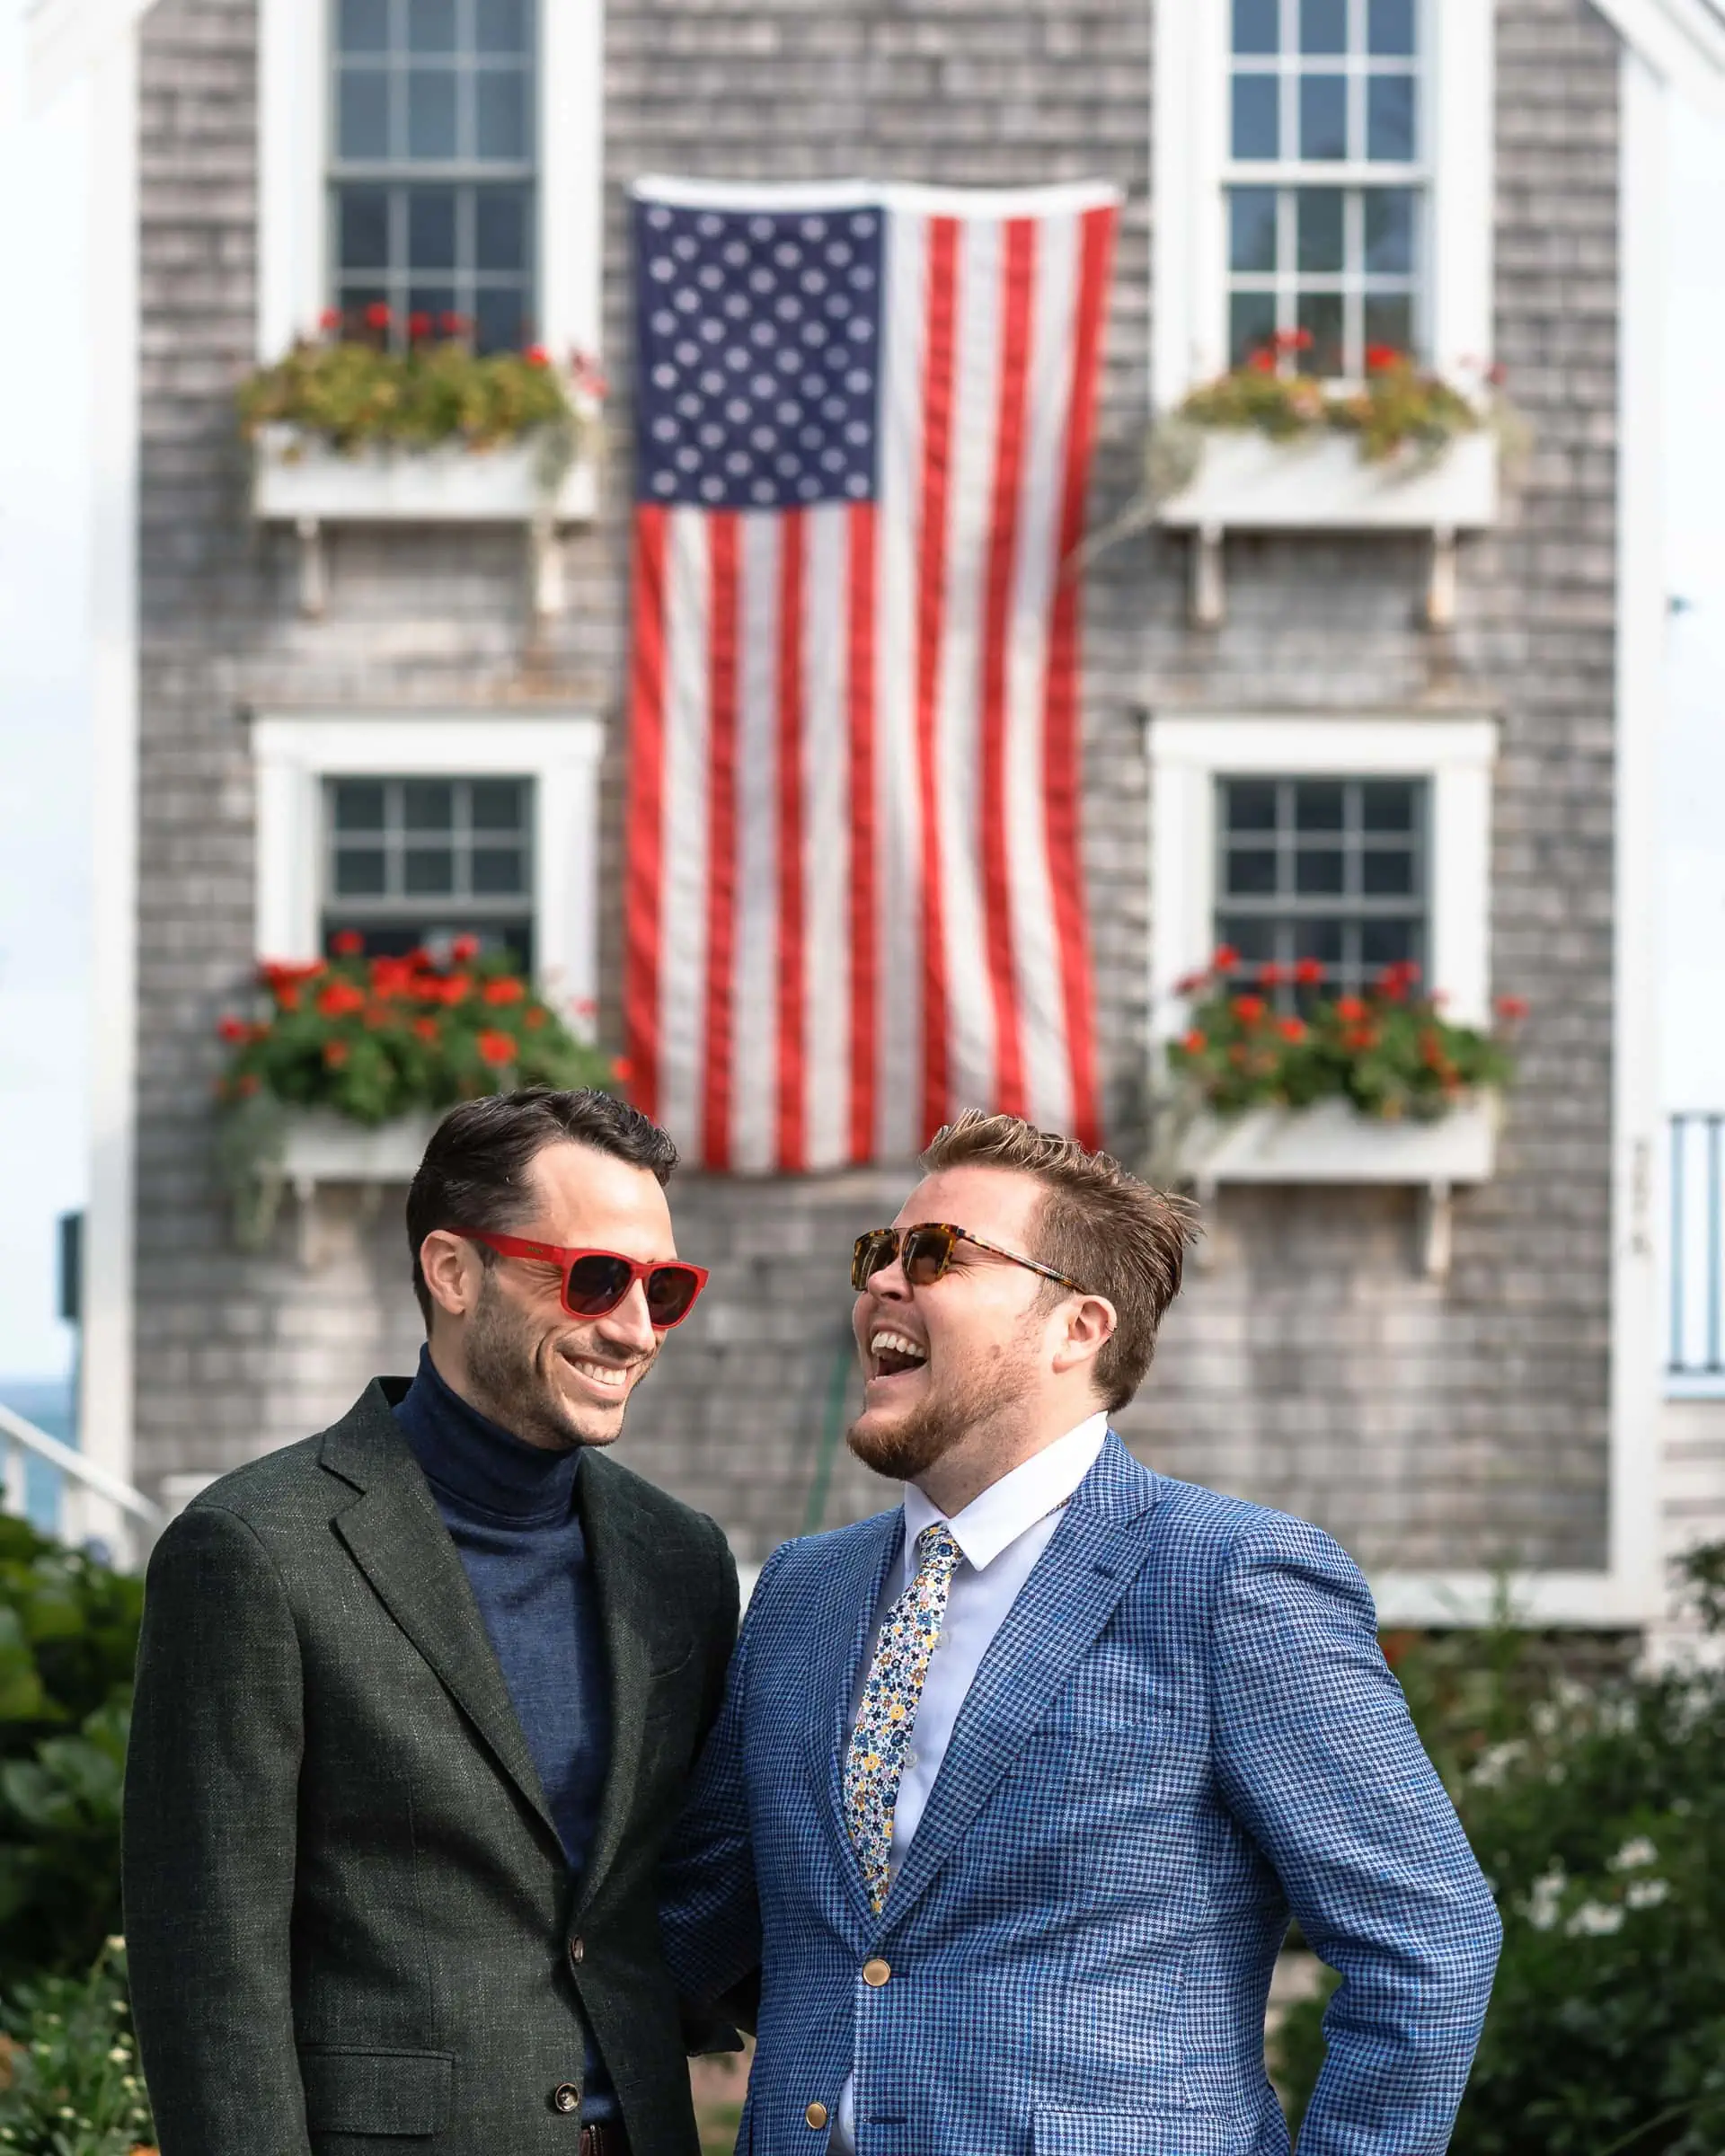 Two man in suits laugh in front of a house with a large american flag